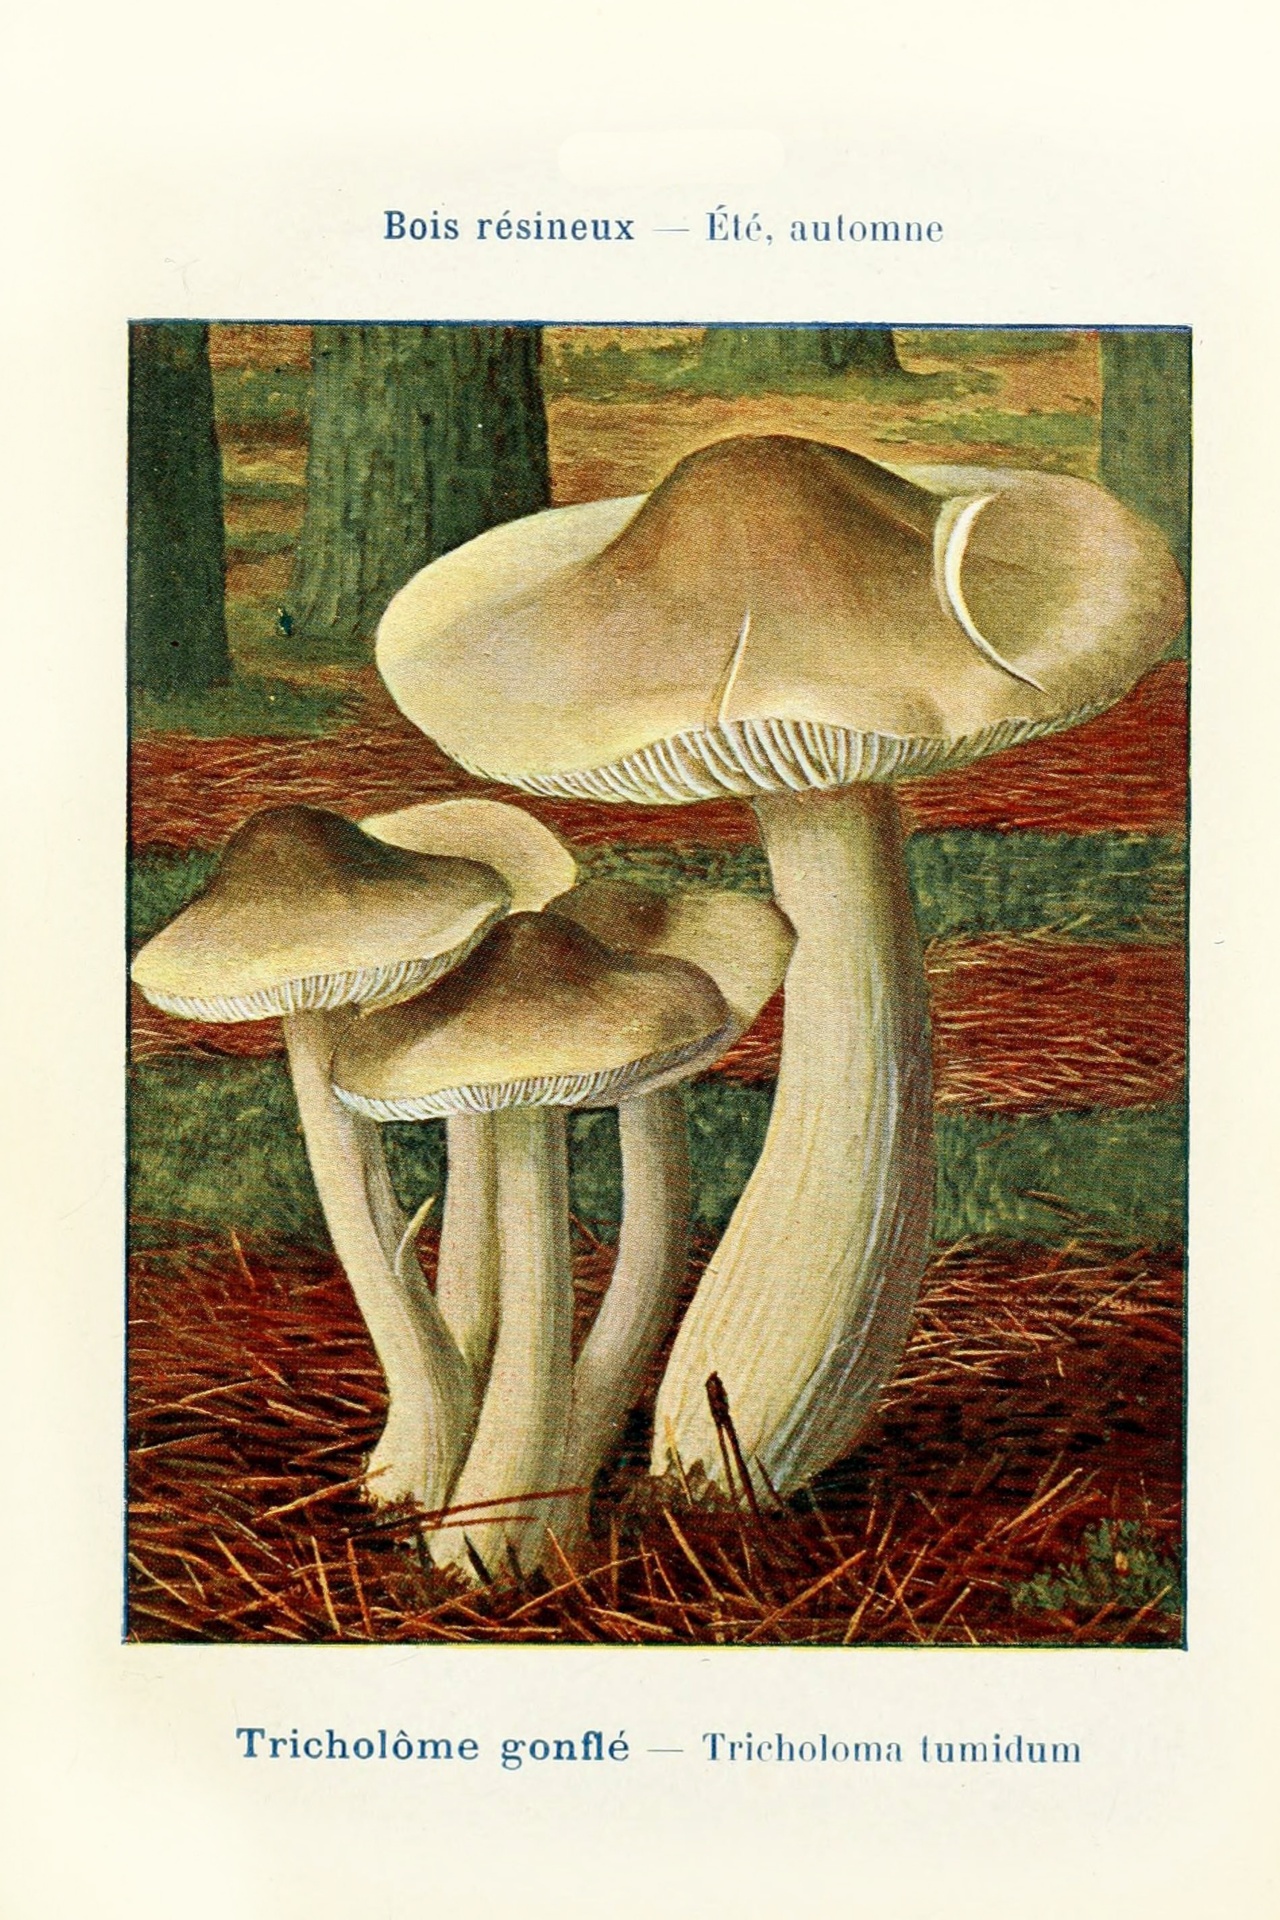 Mushrooms century vintage old learning knowledge board variety species mushroom retro illustration drawing antique explanation plants forest edible toxic biology